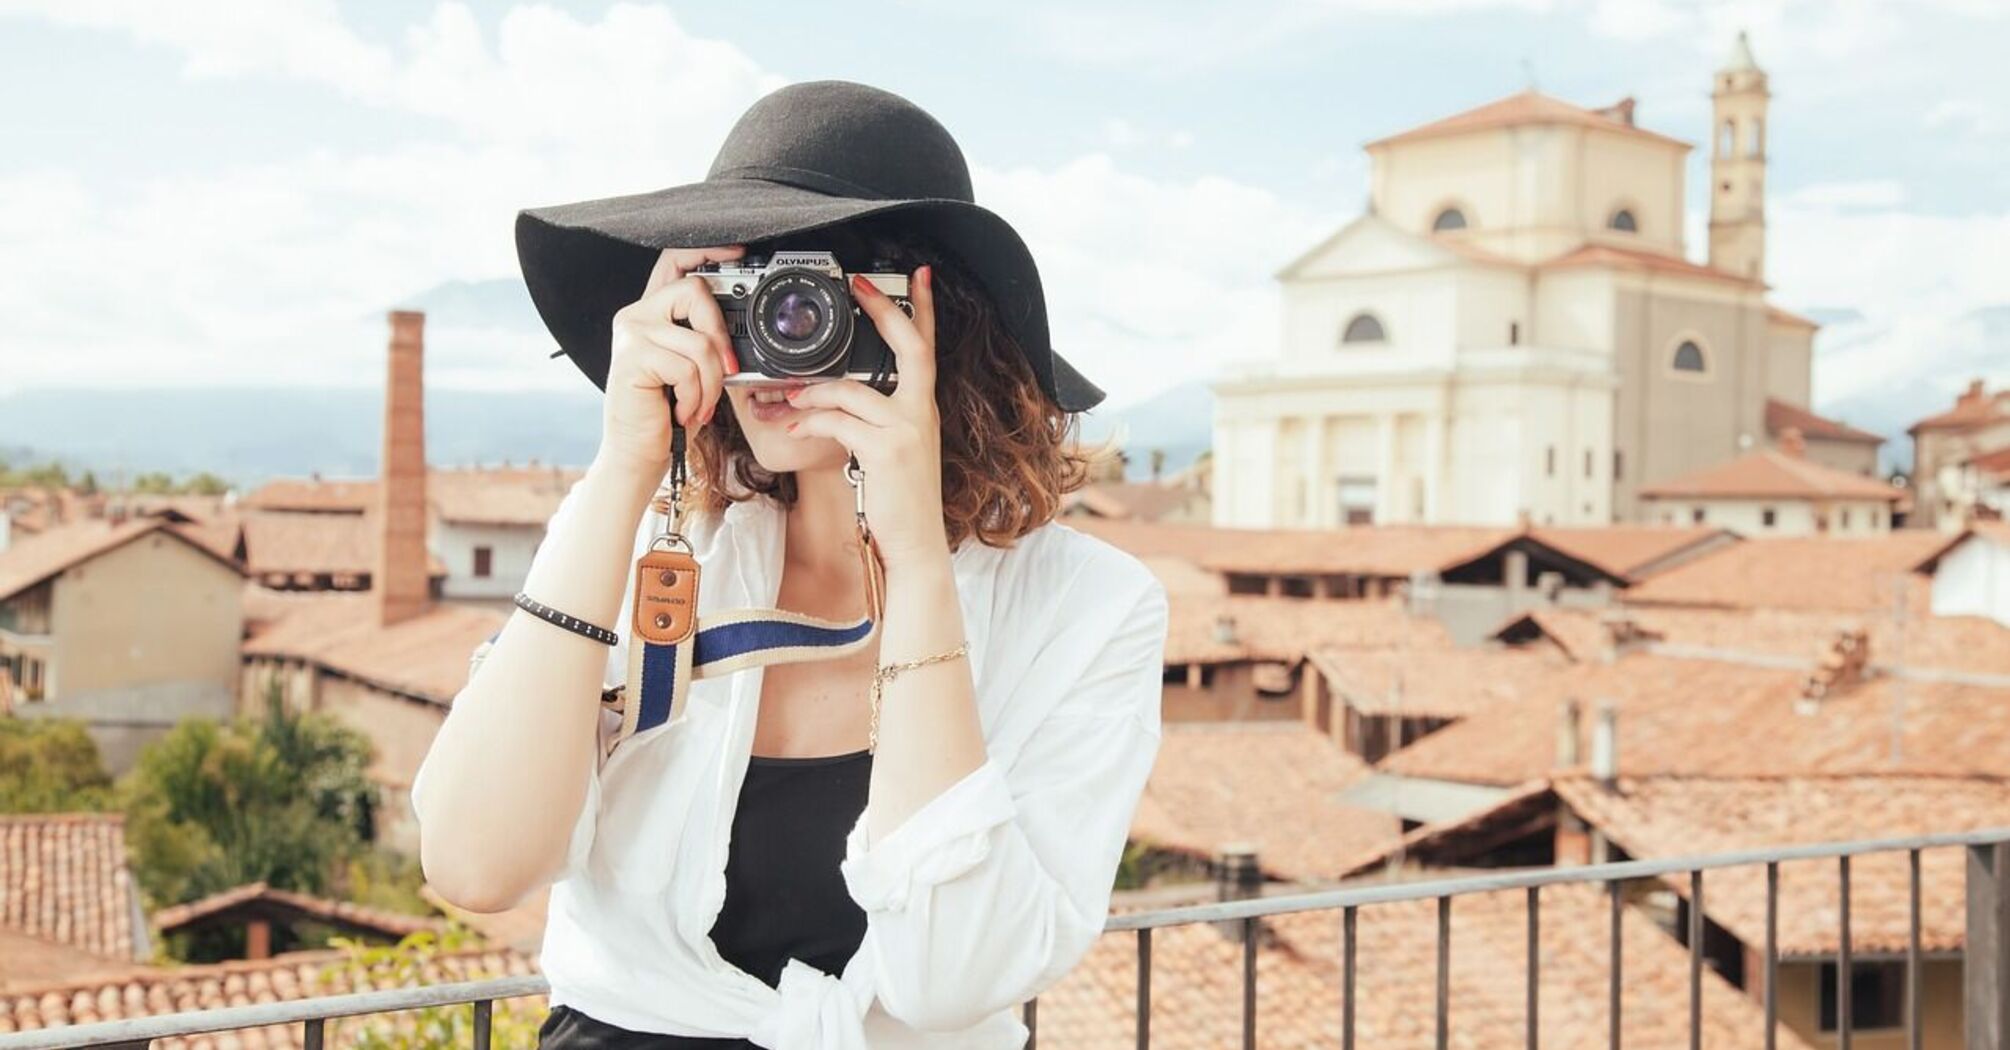 The safest destinations for women traveling alone have been named